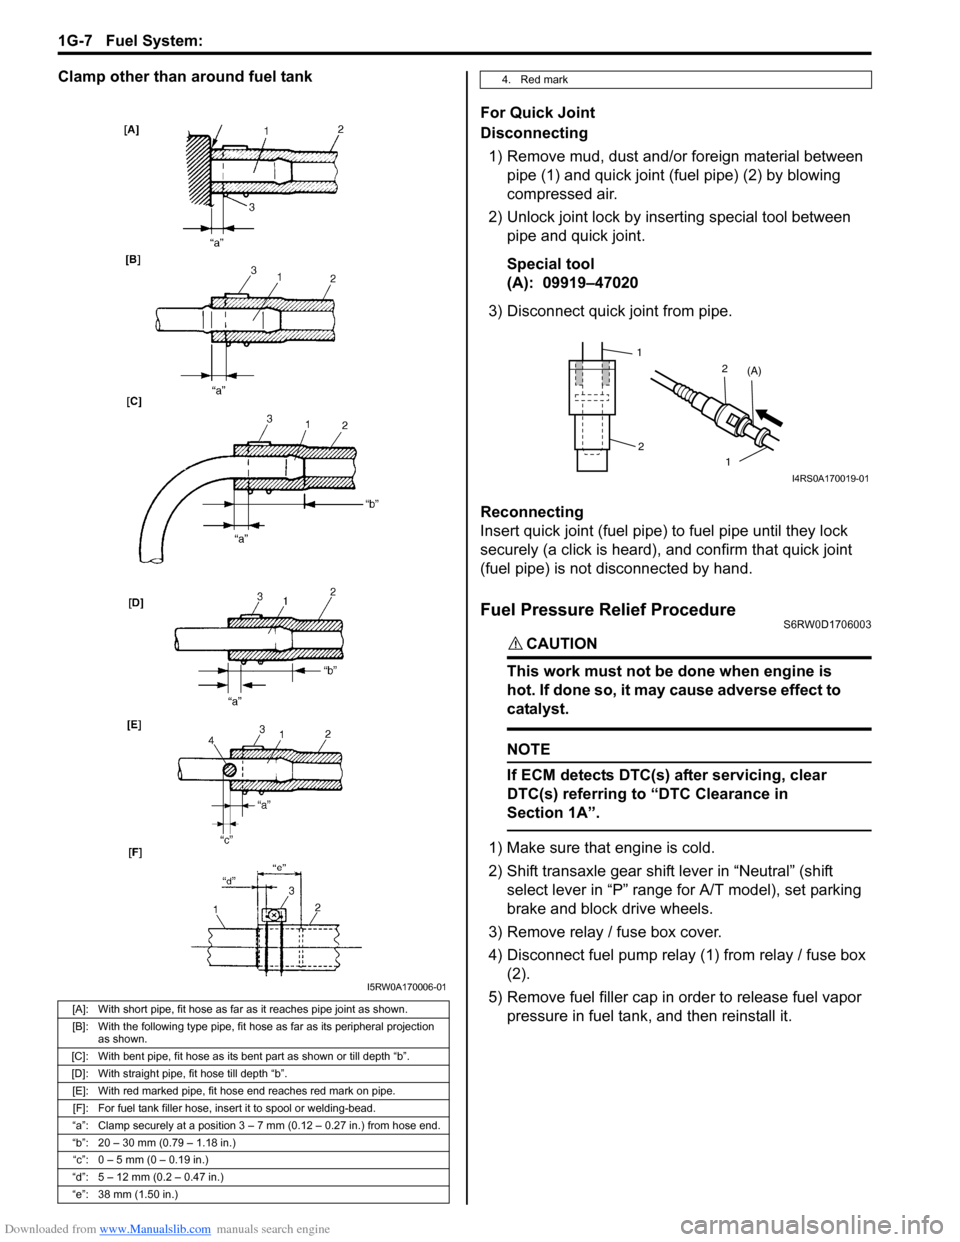 SUZUKI SX4 2006 1.G Service Service Manual Downloaded from www.Manualslib.com manuals search engine 1G-7 Fuel System: 
Clamp other than around fuel tank 
For Quick Joint
Disconnecting
1) Remove mud, dust and/or foreign material between 
pipe (